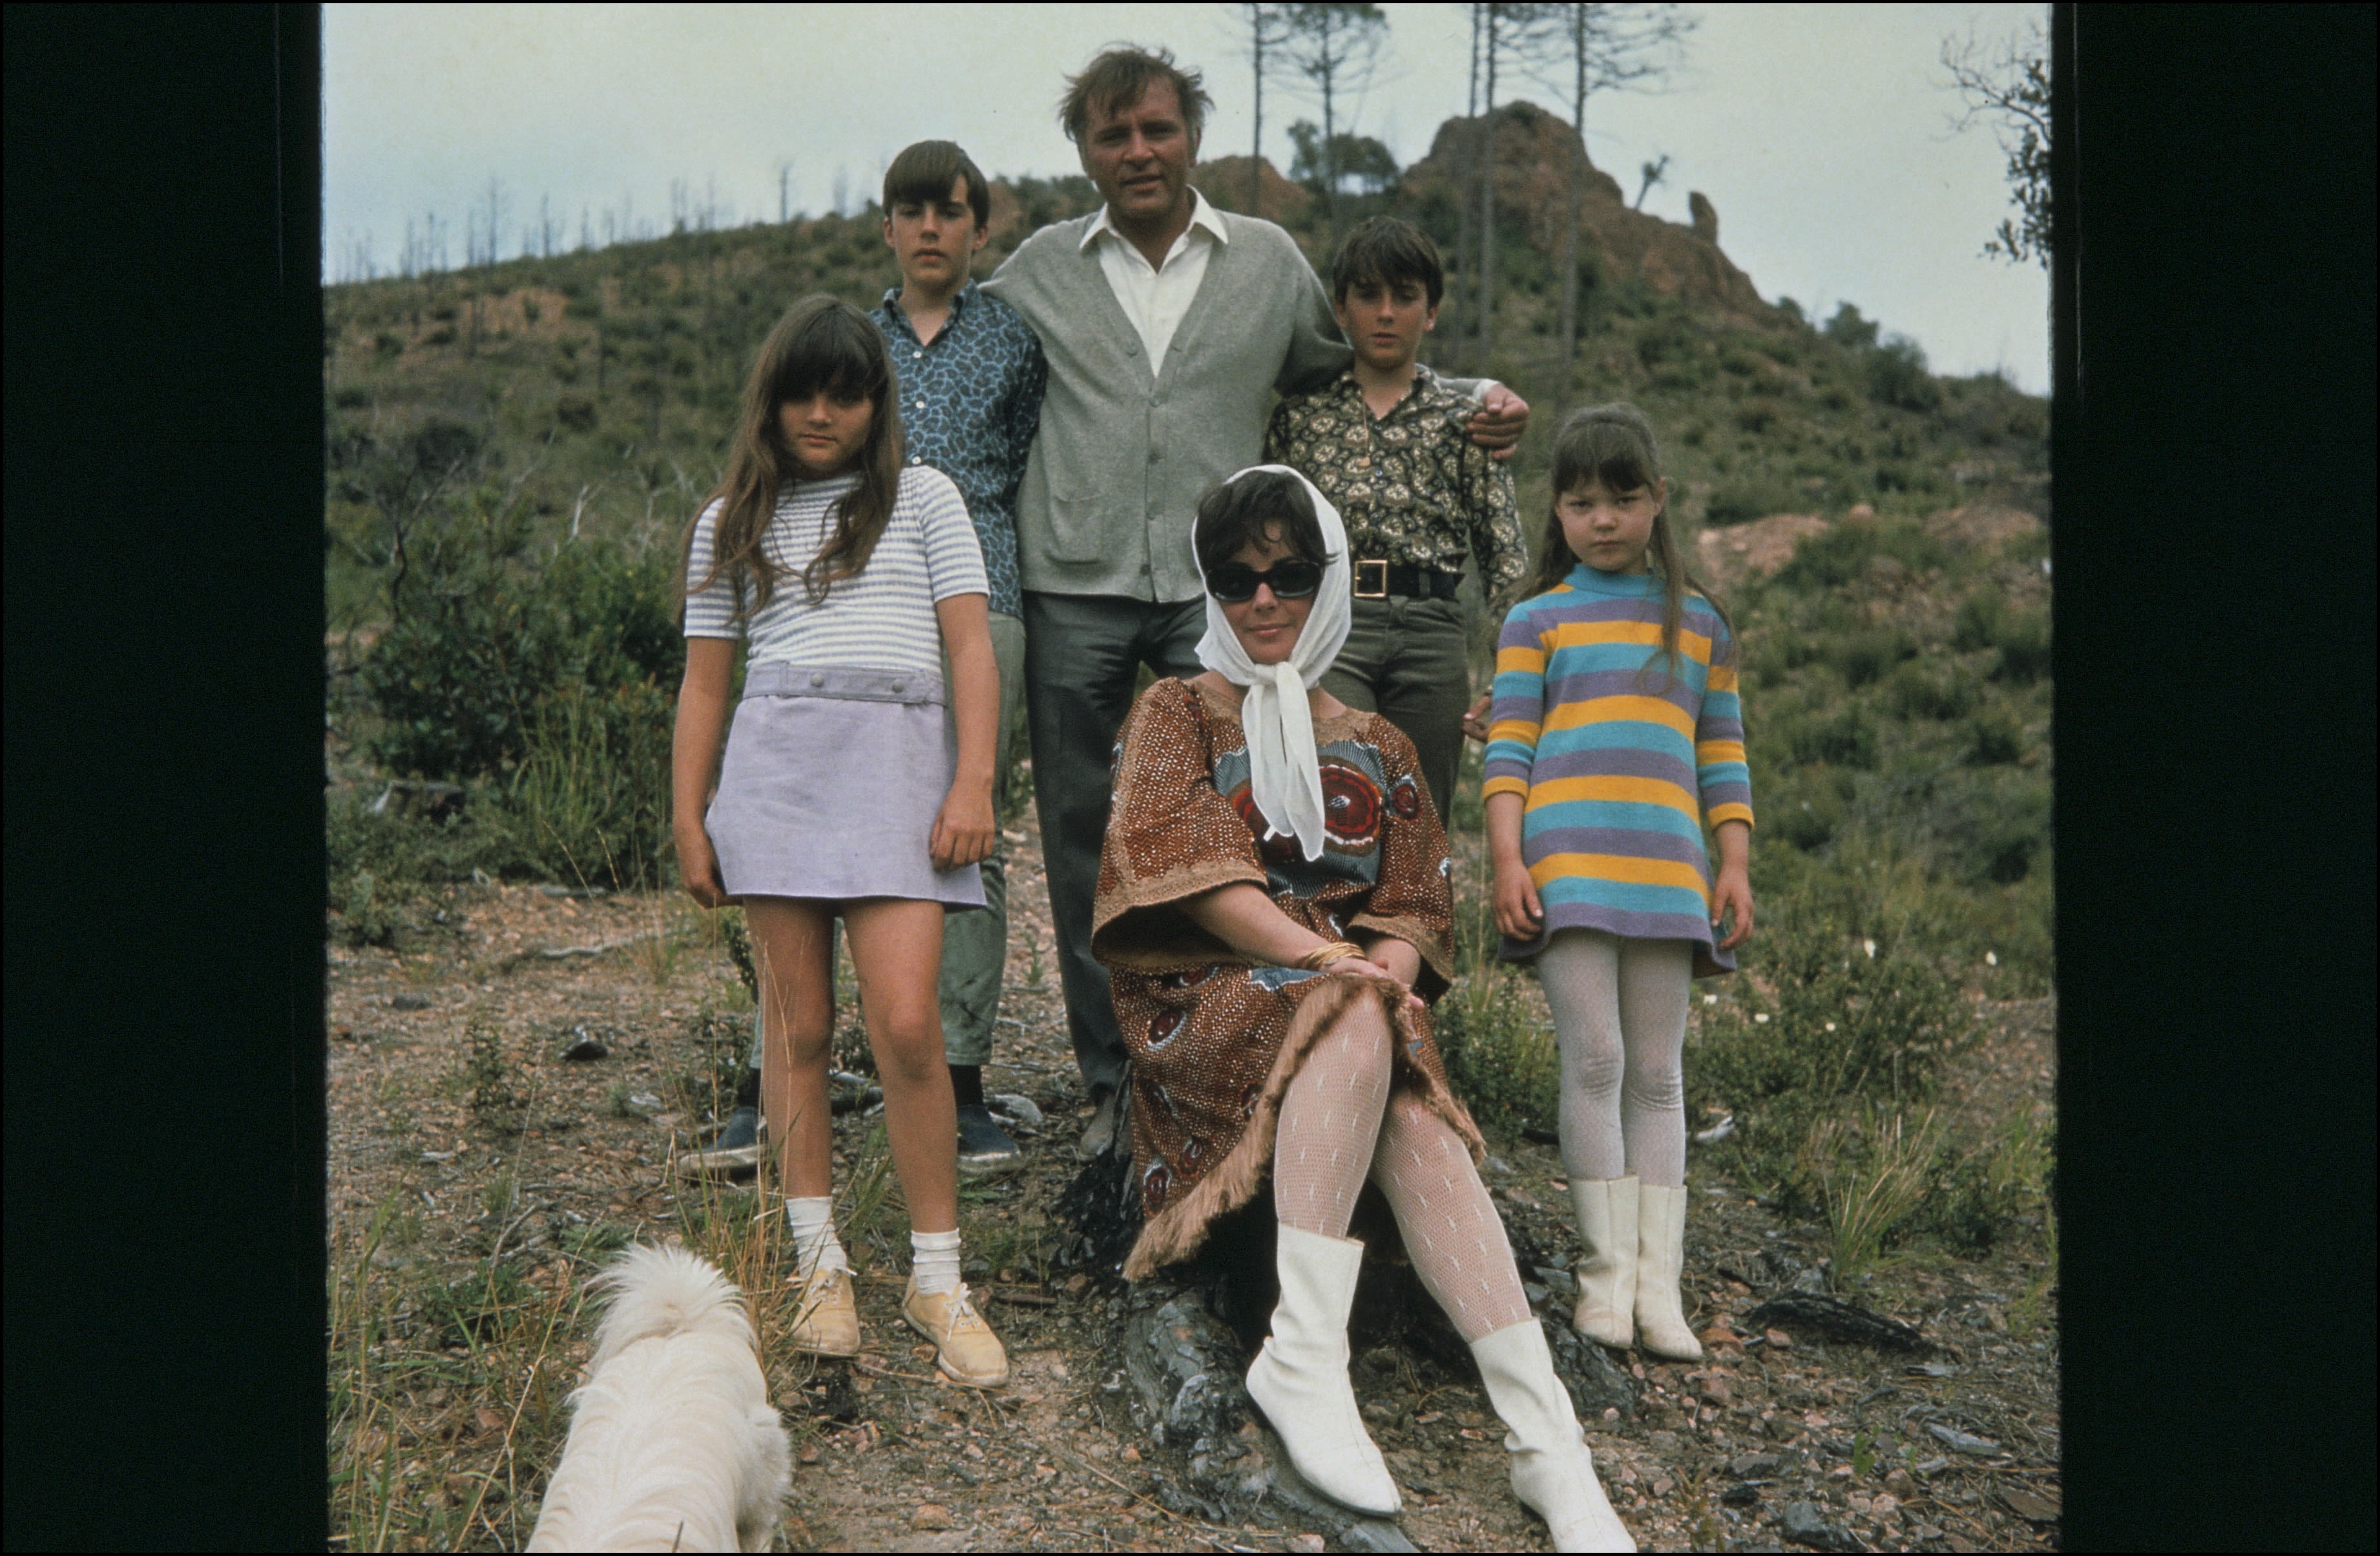 Elizabeth Taylor with Richard Burton and children Michael Wilding, Chistopher Wilding, Elisabeth Todd and Maria Burton in 1967. | Source: Getty Images